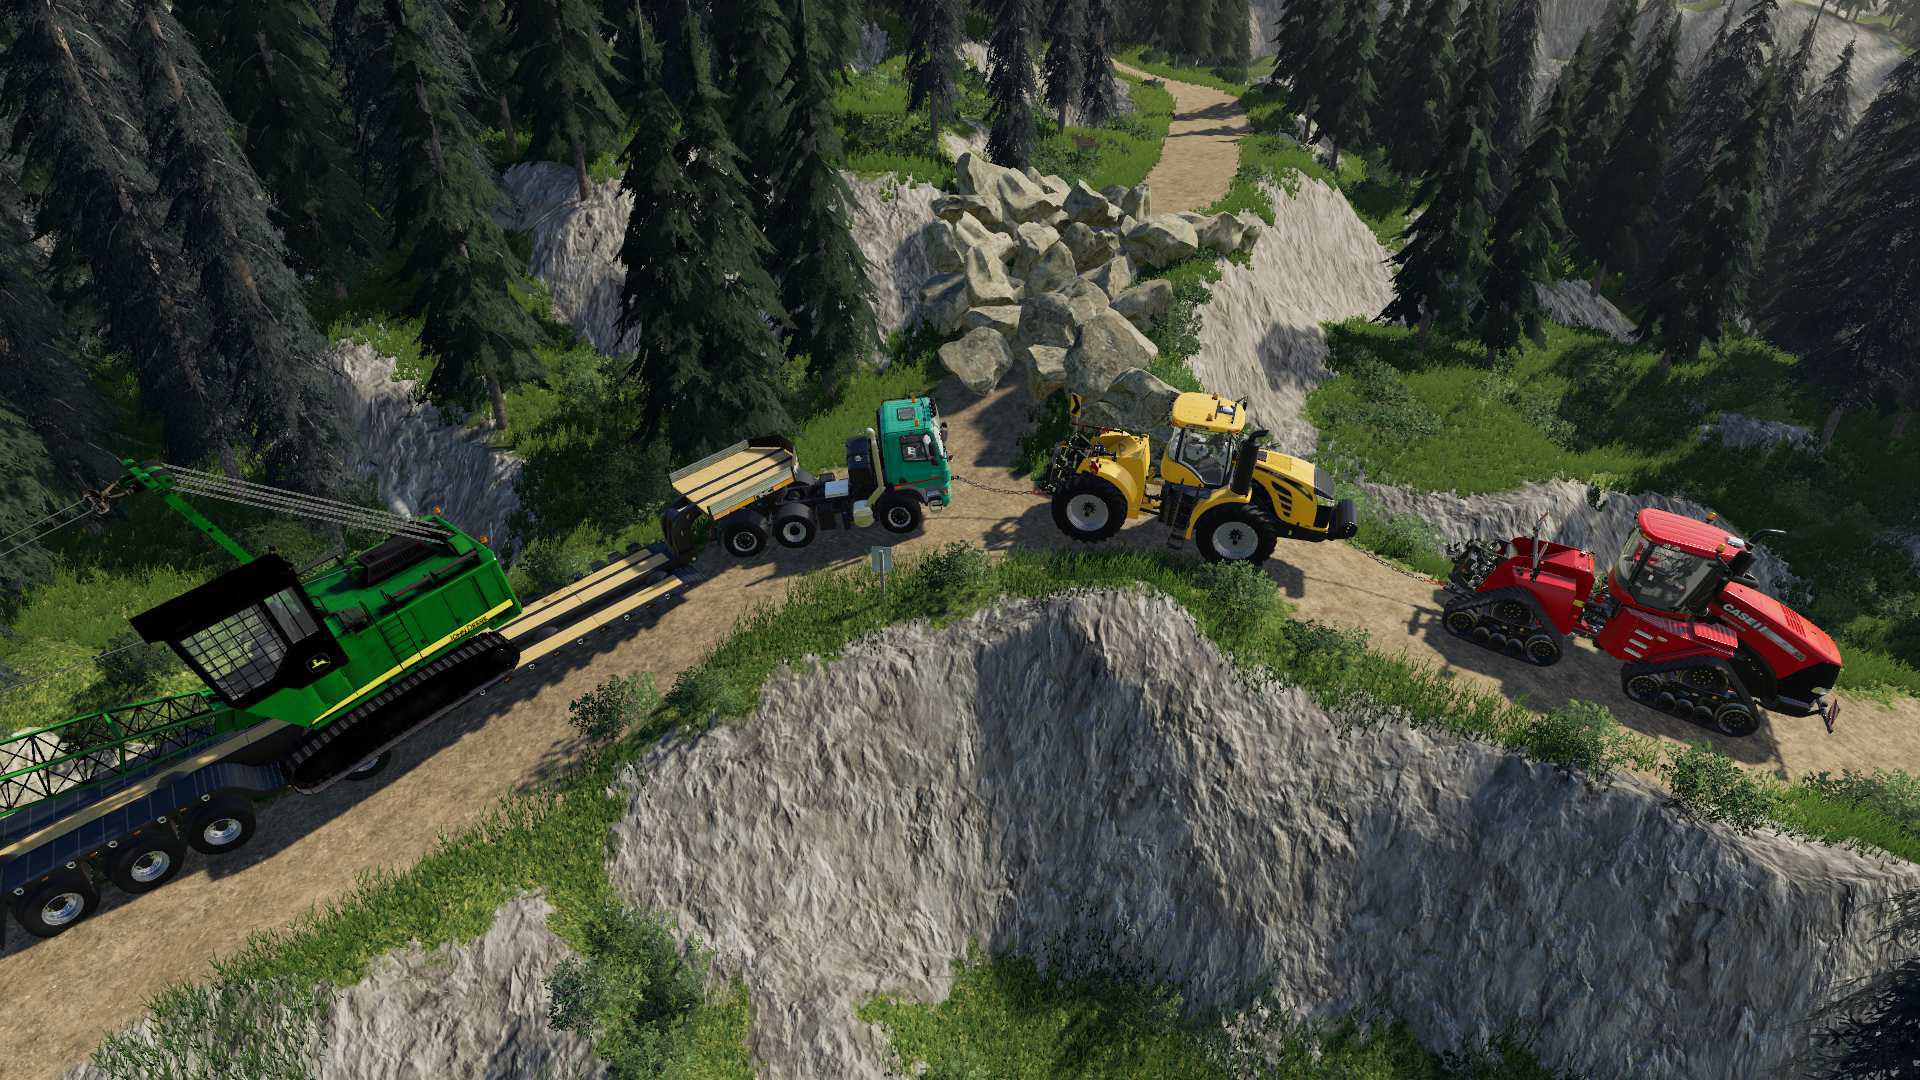 fs19 towing mods